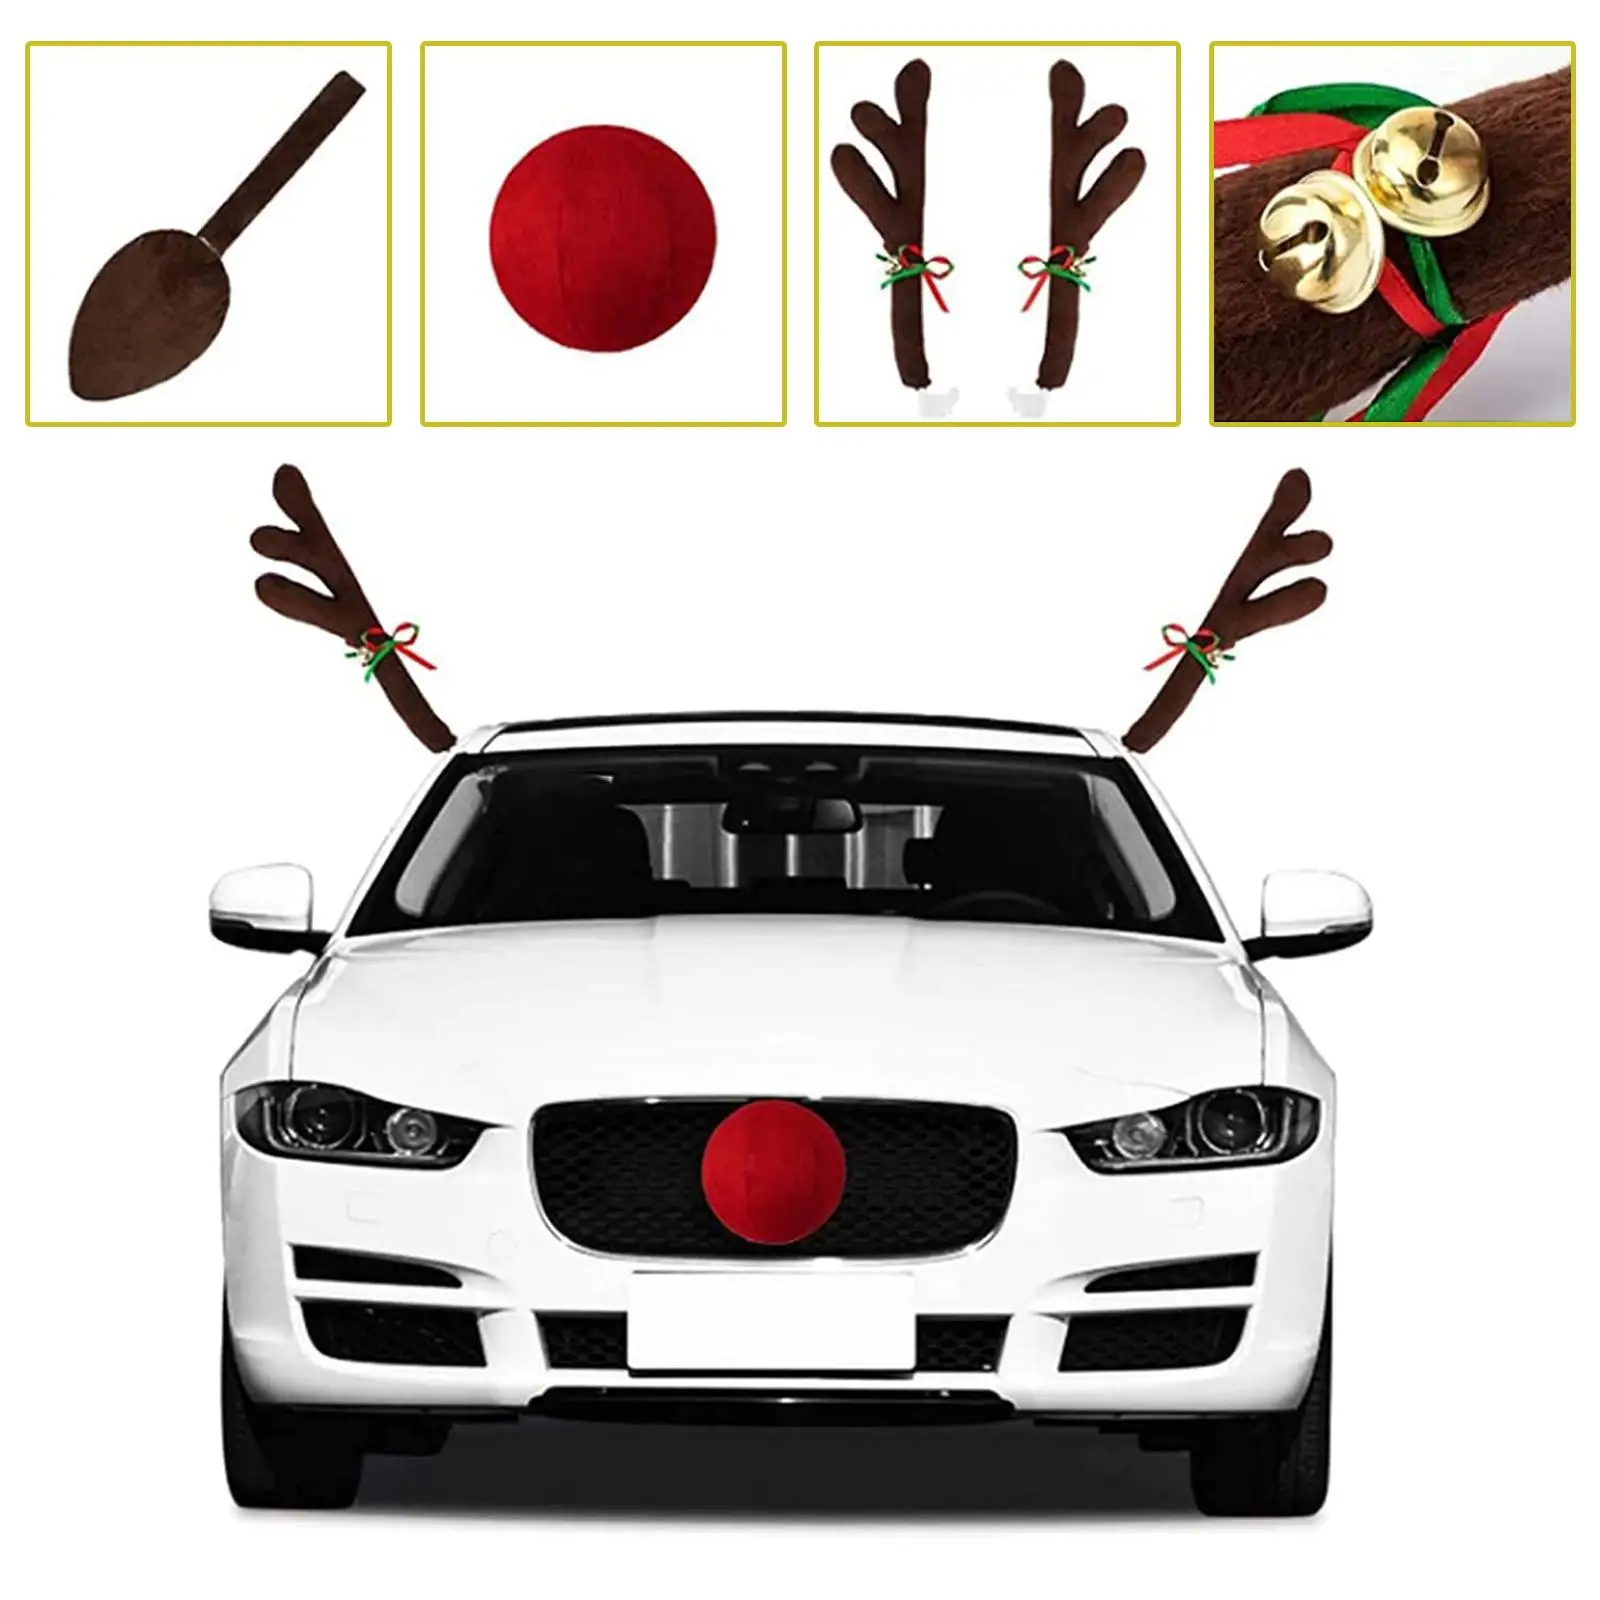 Christmas Reindeer Antlers Car Decoration Kit Party Accessory Easy Installation for SUV Van